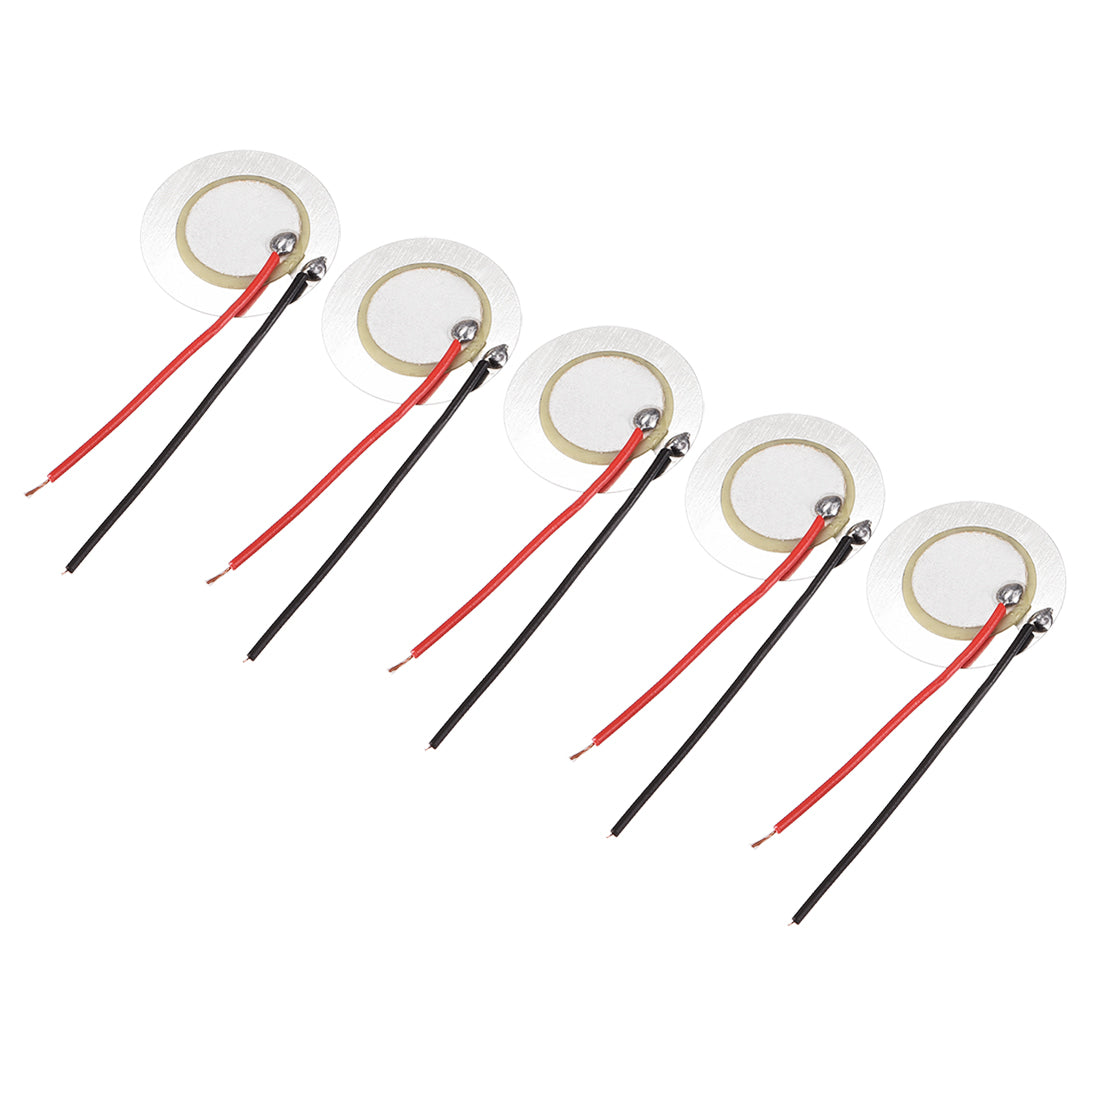 uxcell Uxcell 5 Pcs Piezo Discs 20mm Acoustic Pickup Transducer Prewired Microphone Trigger Buzzer CBG Guitar